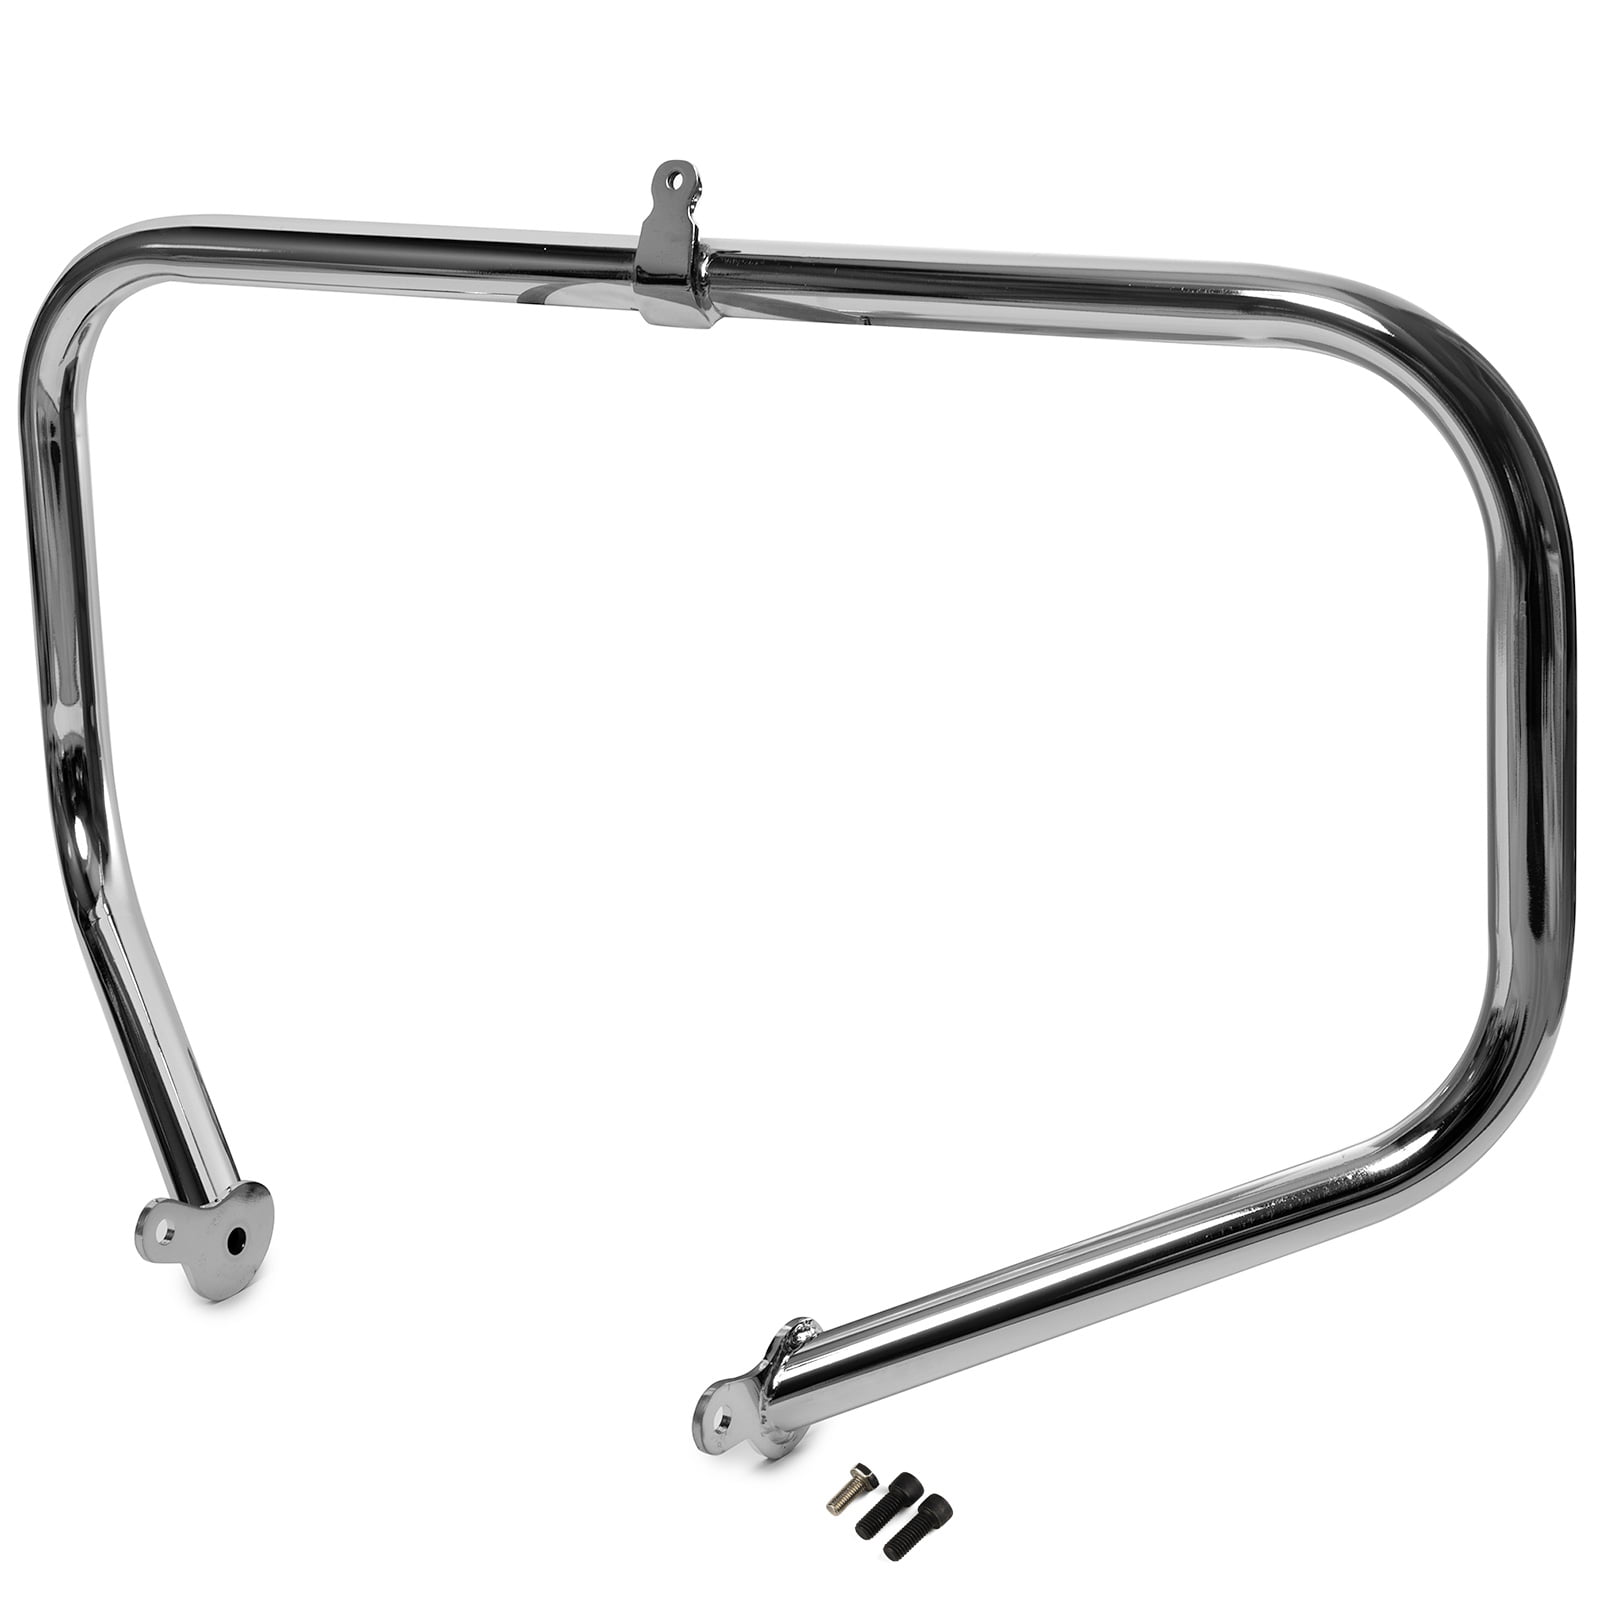 Engine Highway Guard Bar Fit For Harley Touring Electra Glide Ultra Classic 